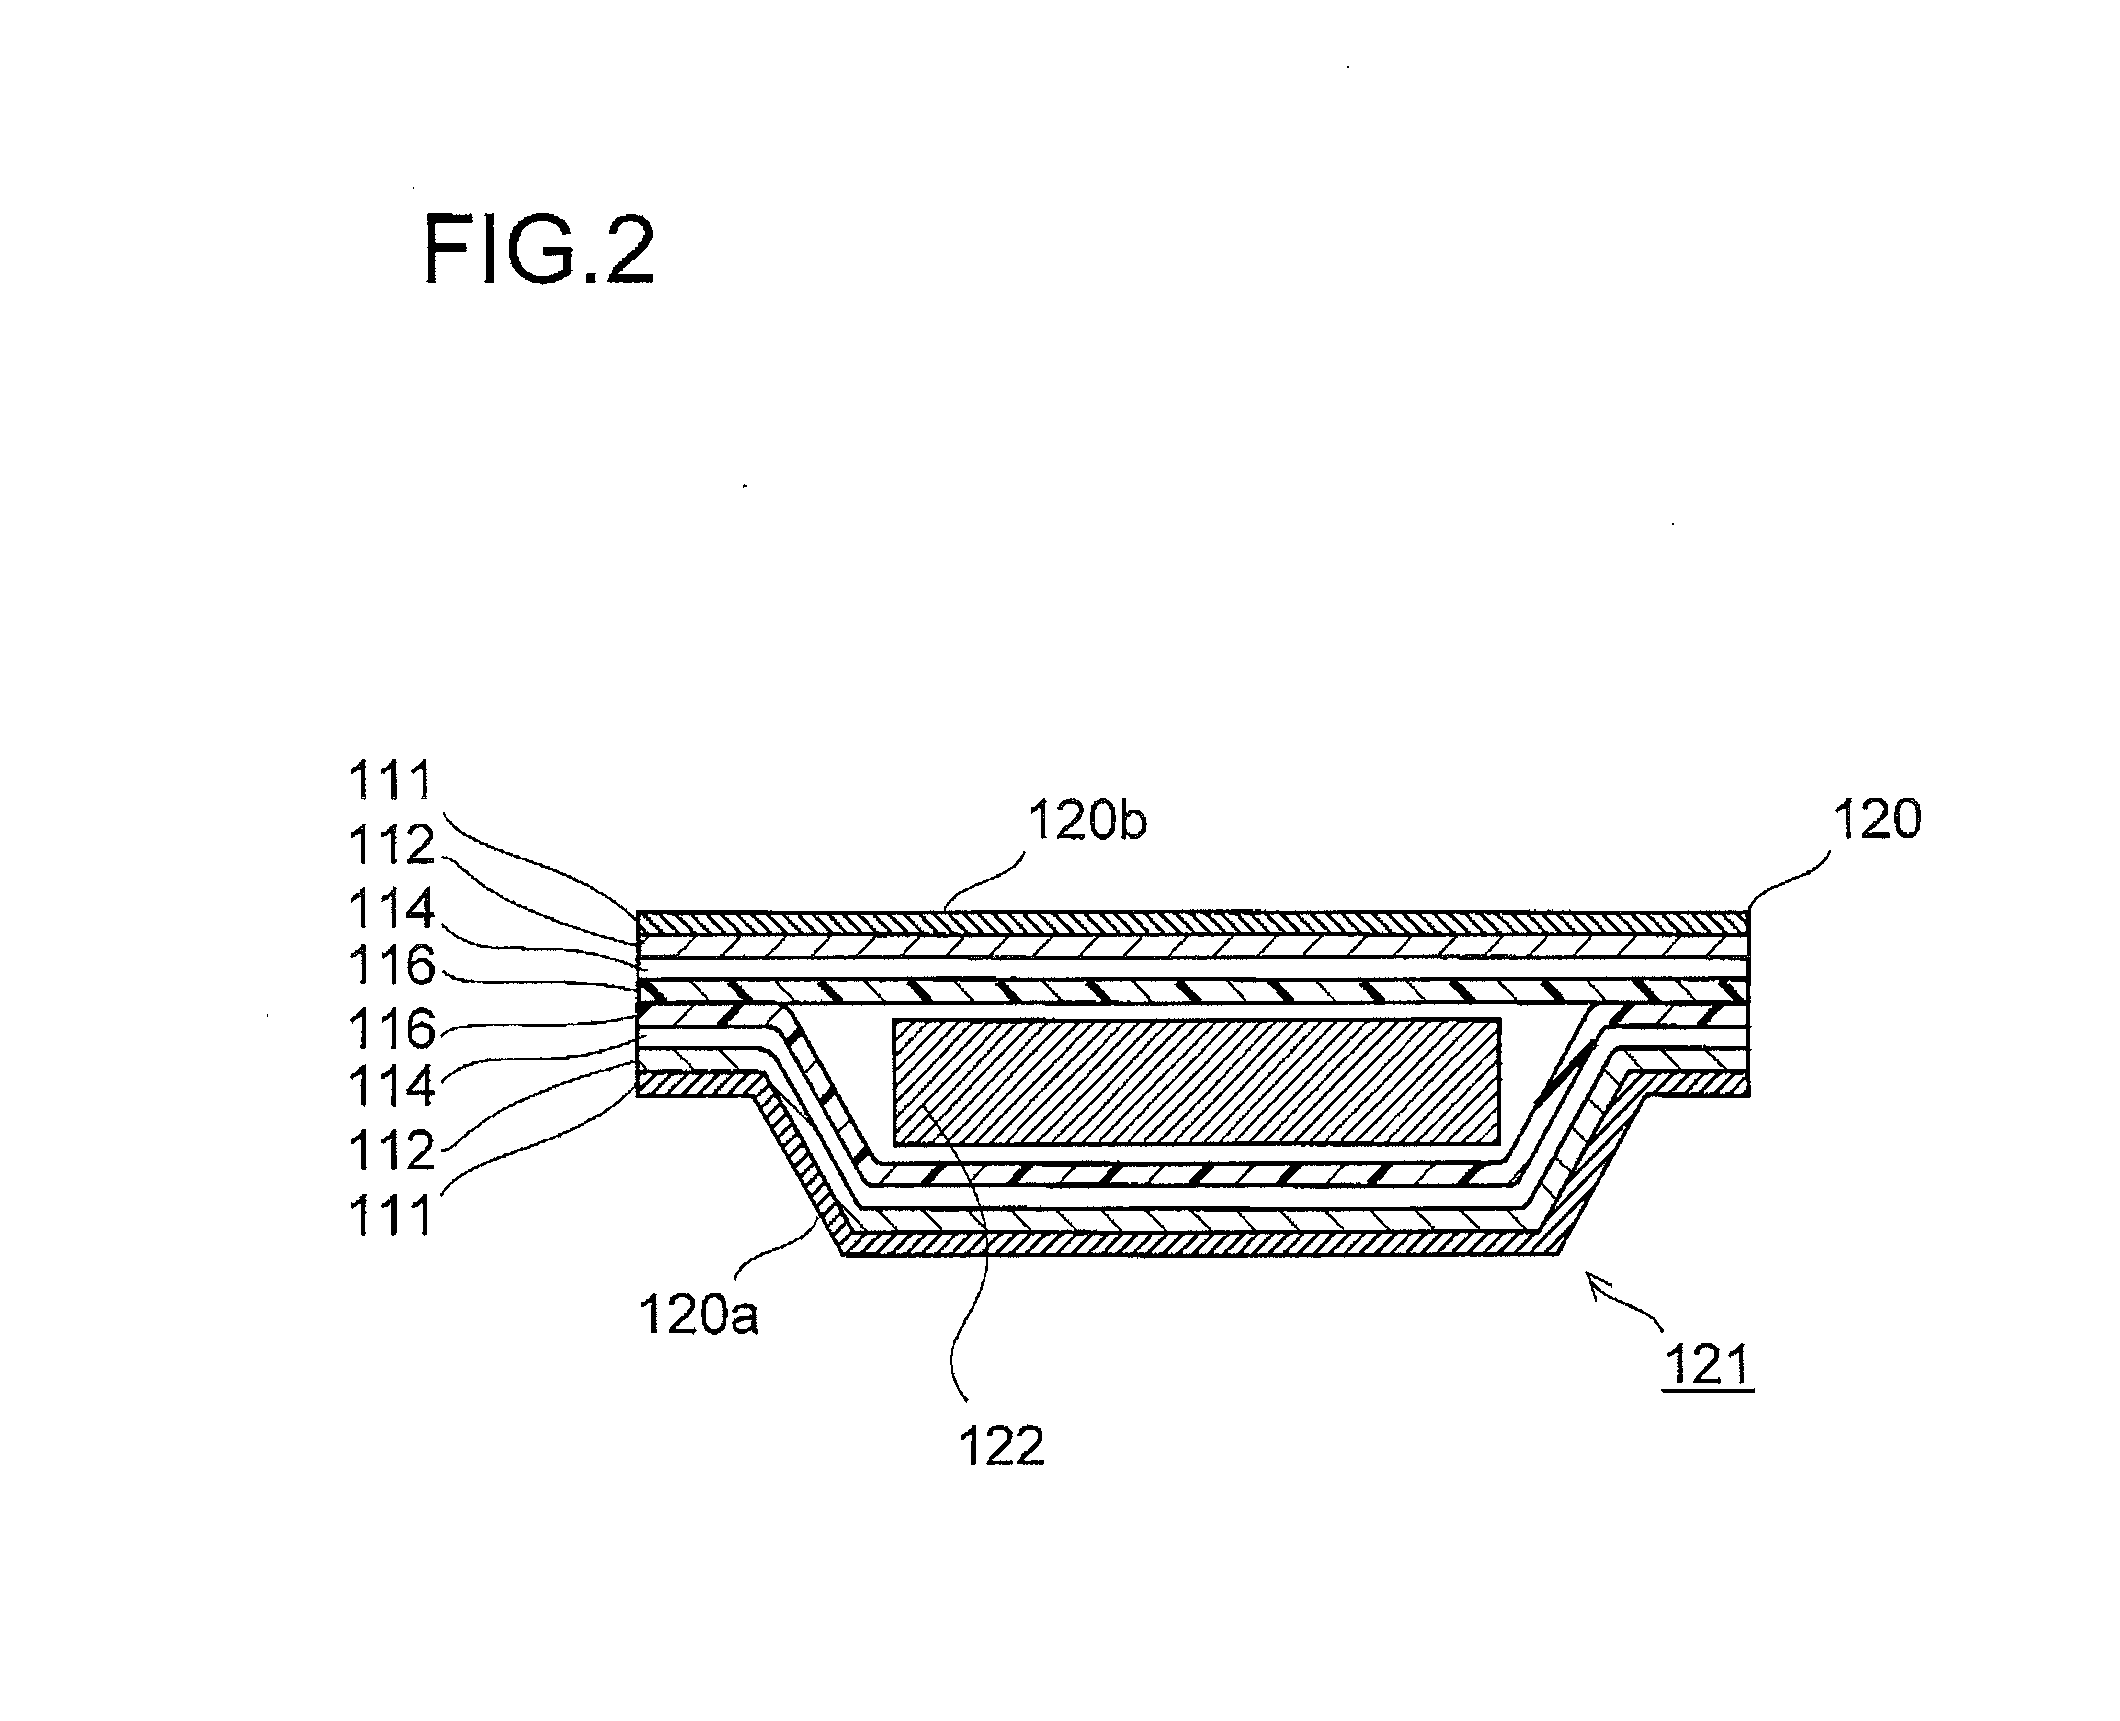 Electrochemical cell packaging material